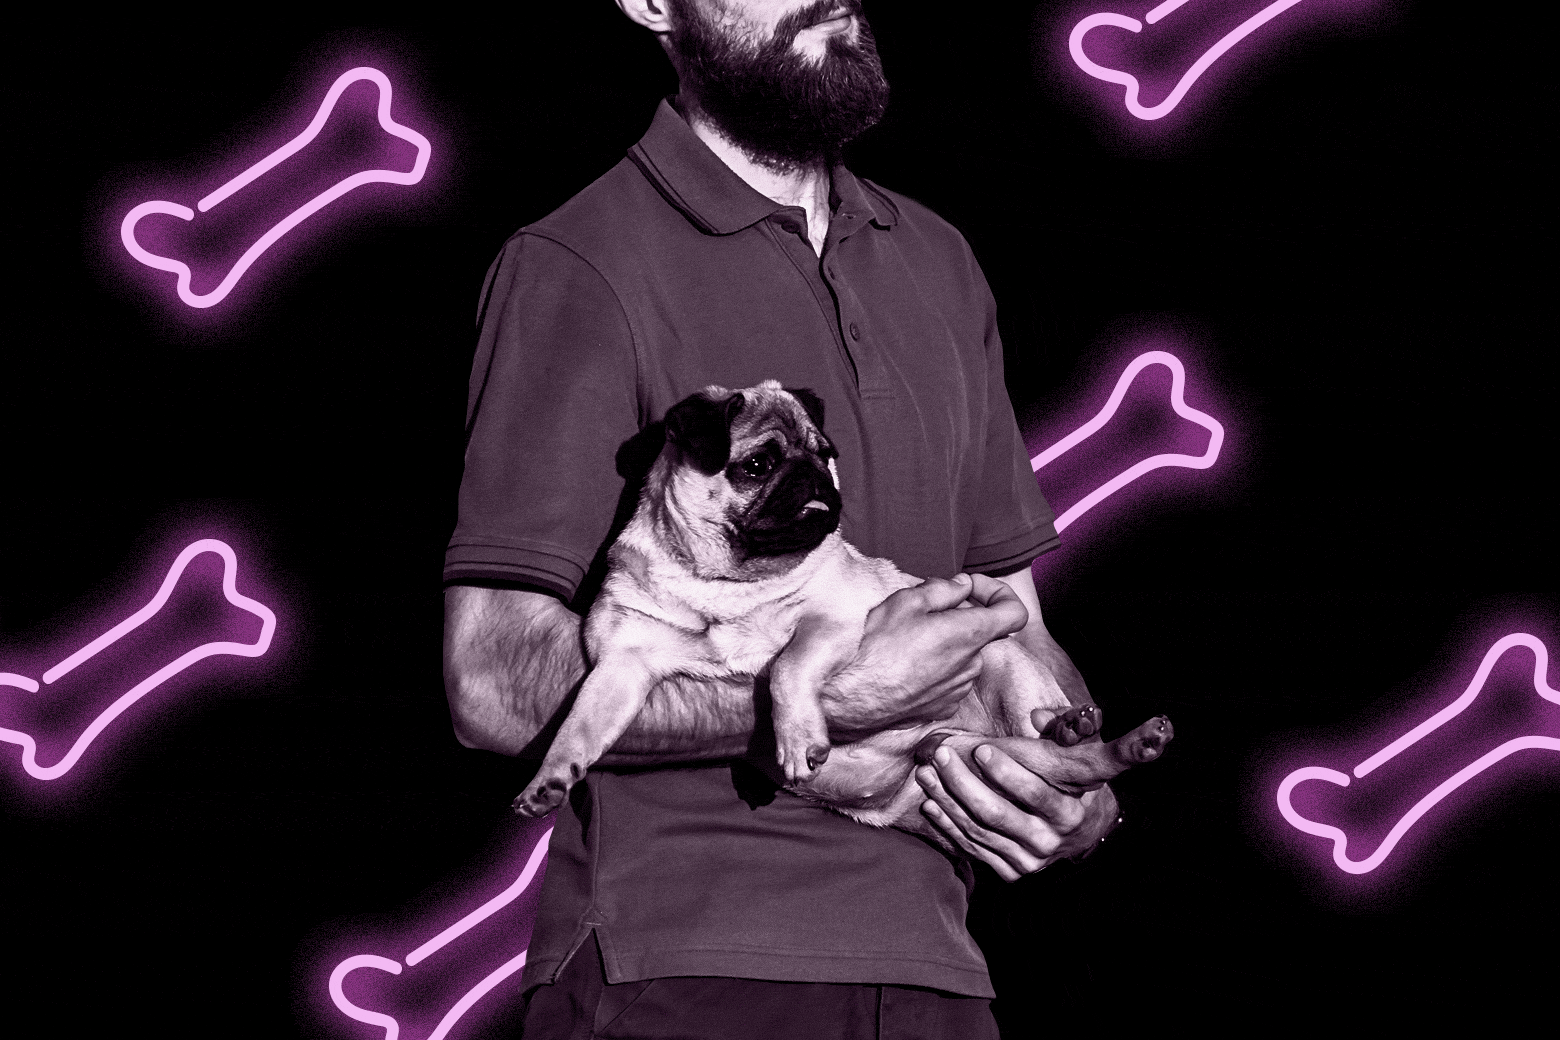 I saw my girlfriend getting oral sex from her dog. What now?